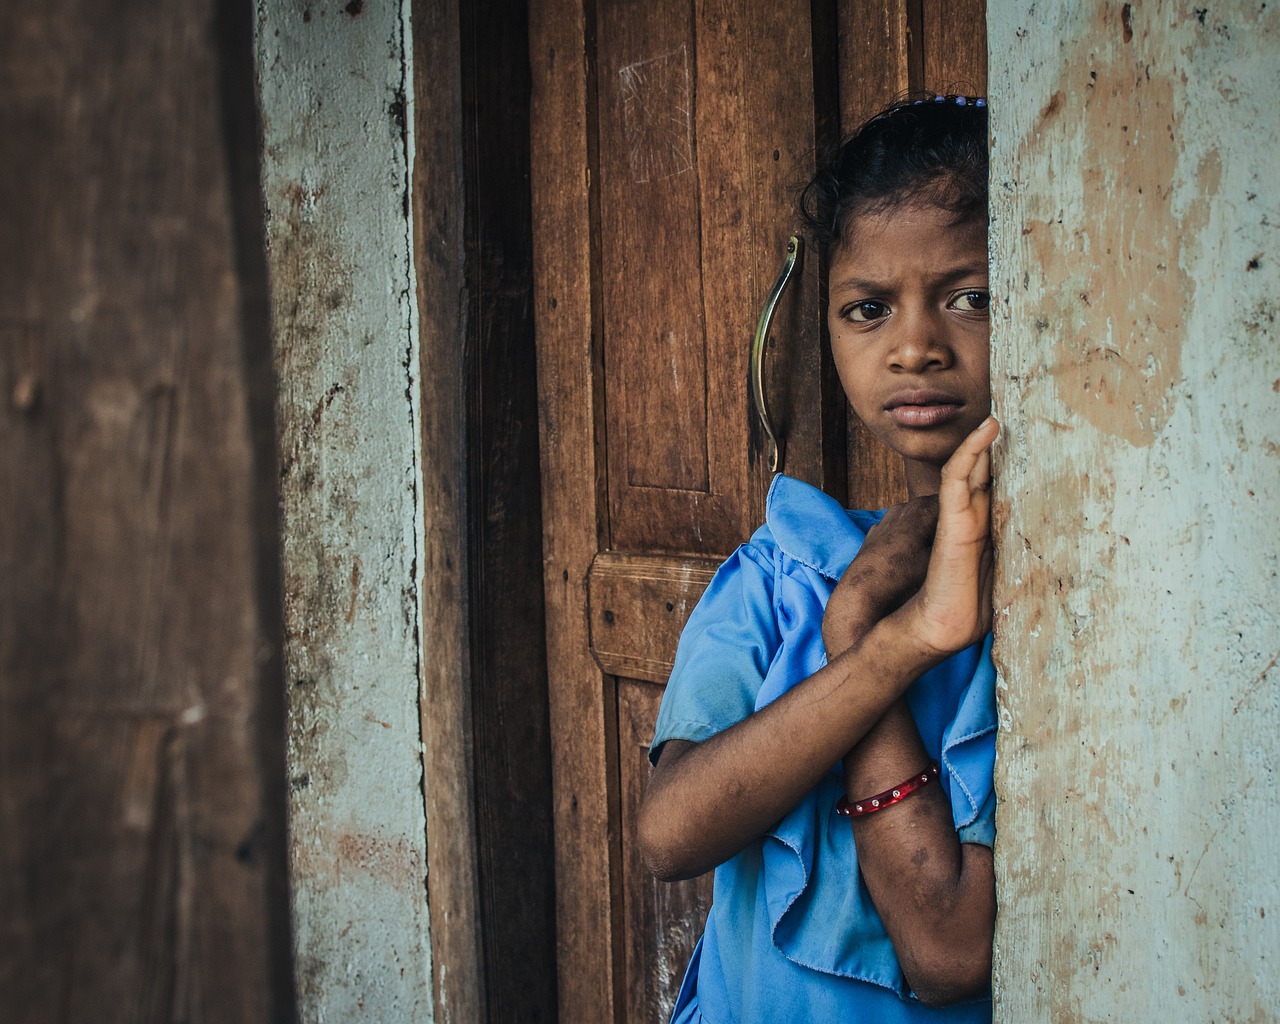 A girl in India standing next to a door